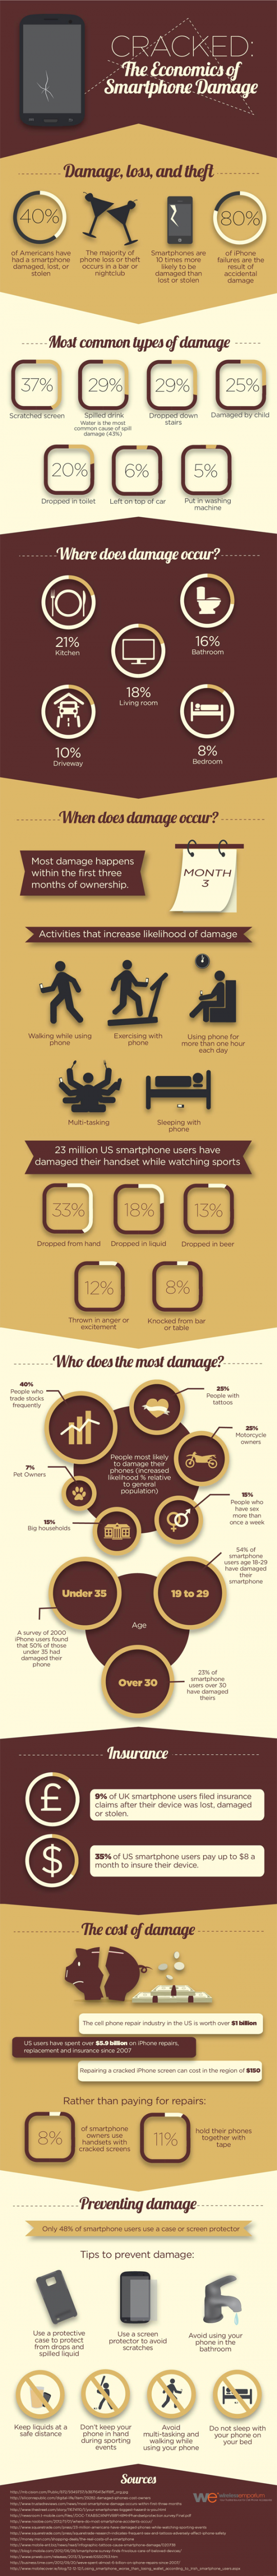 Cell Phone Smartphone Damage Prevention Infographic Cracked: The Economics of Smartphone Damage